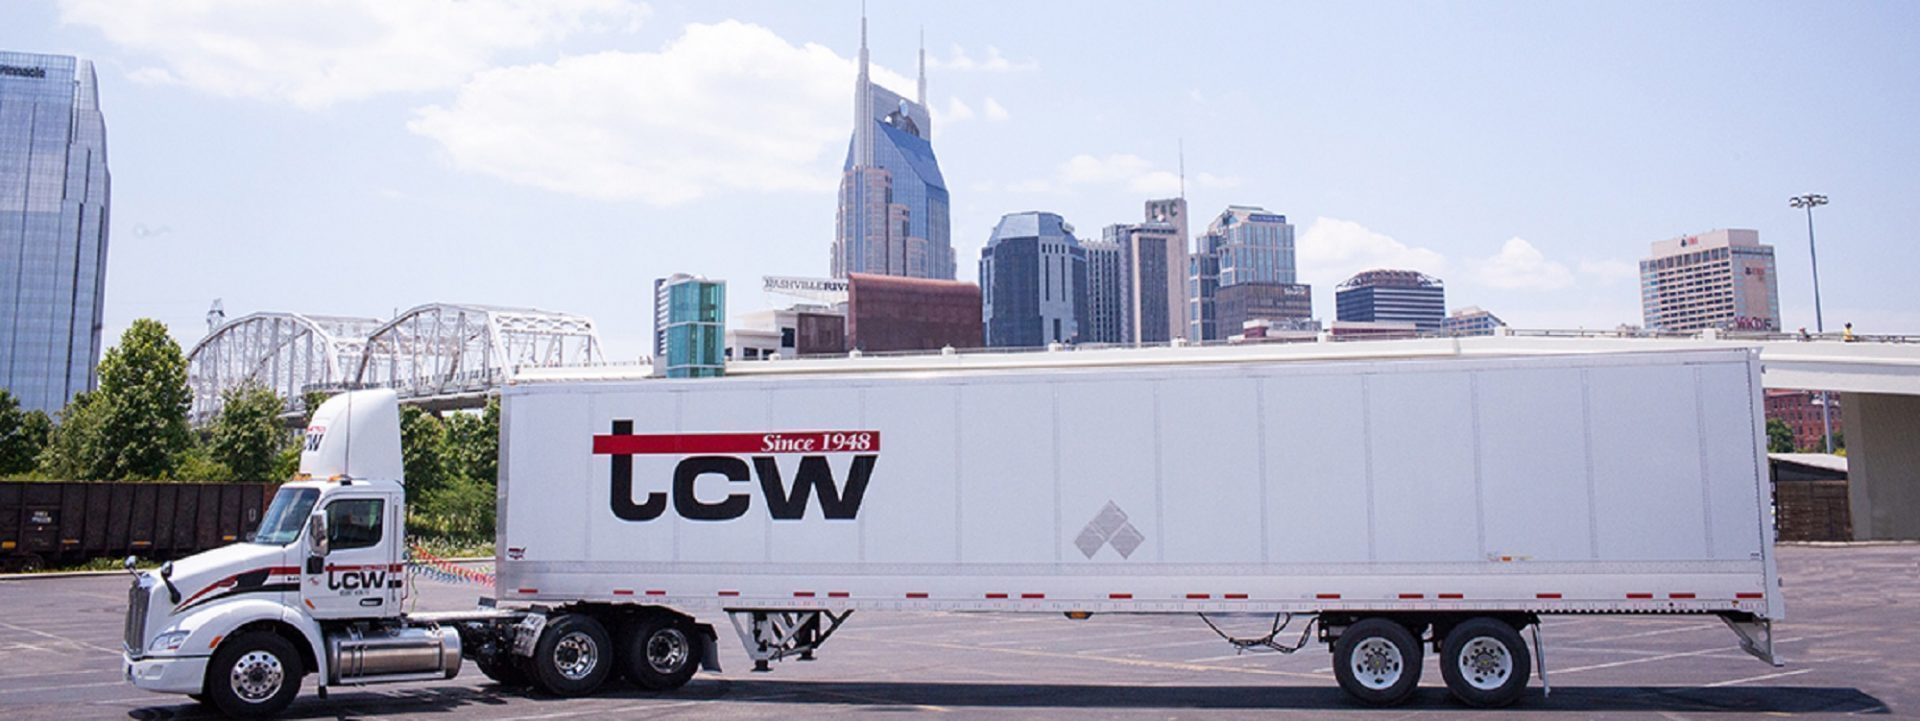 TCW Emphasizes “Commitment To Safety”